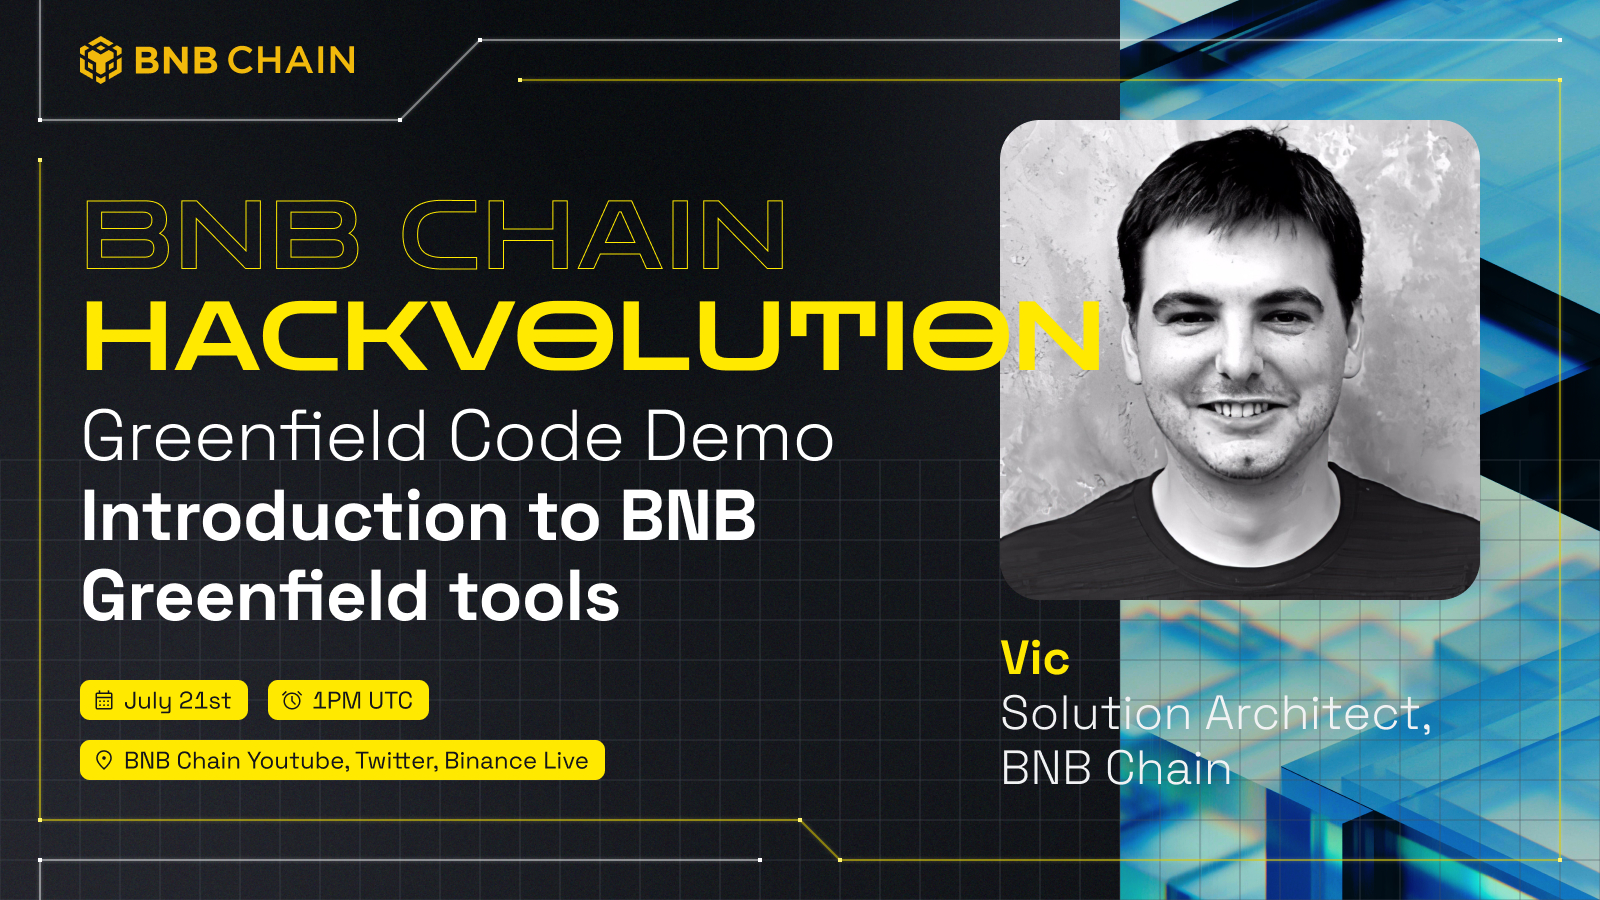 BNB Chain Hackvolution: Introduction to BNB Greenfield tools